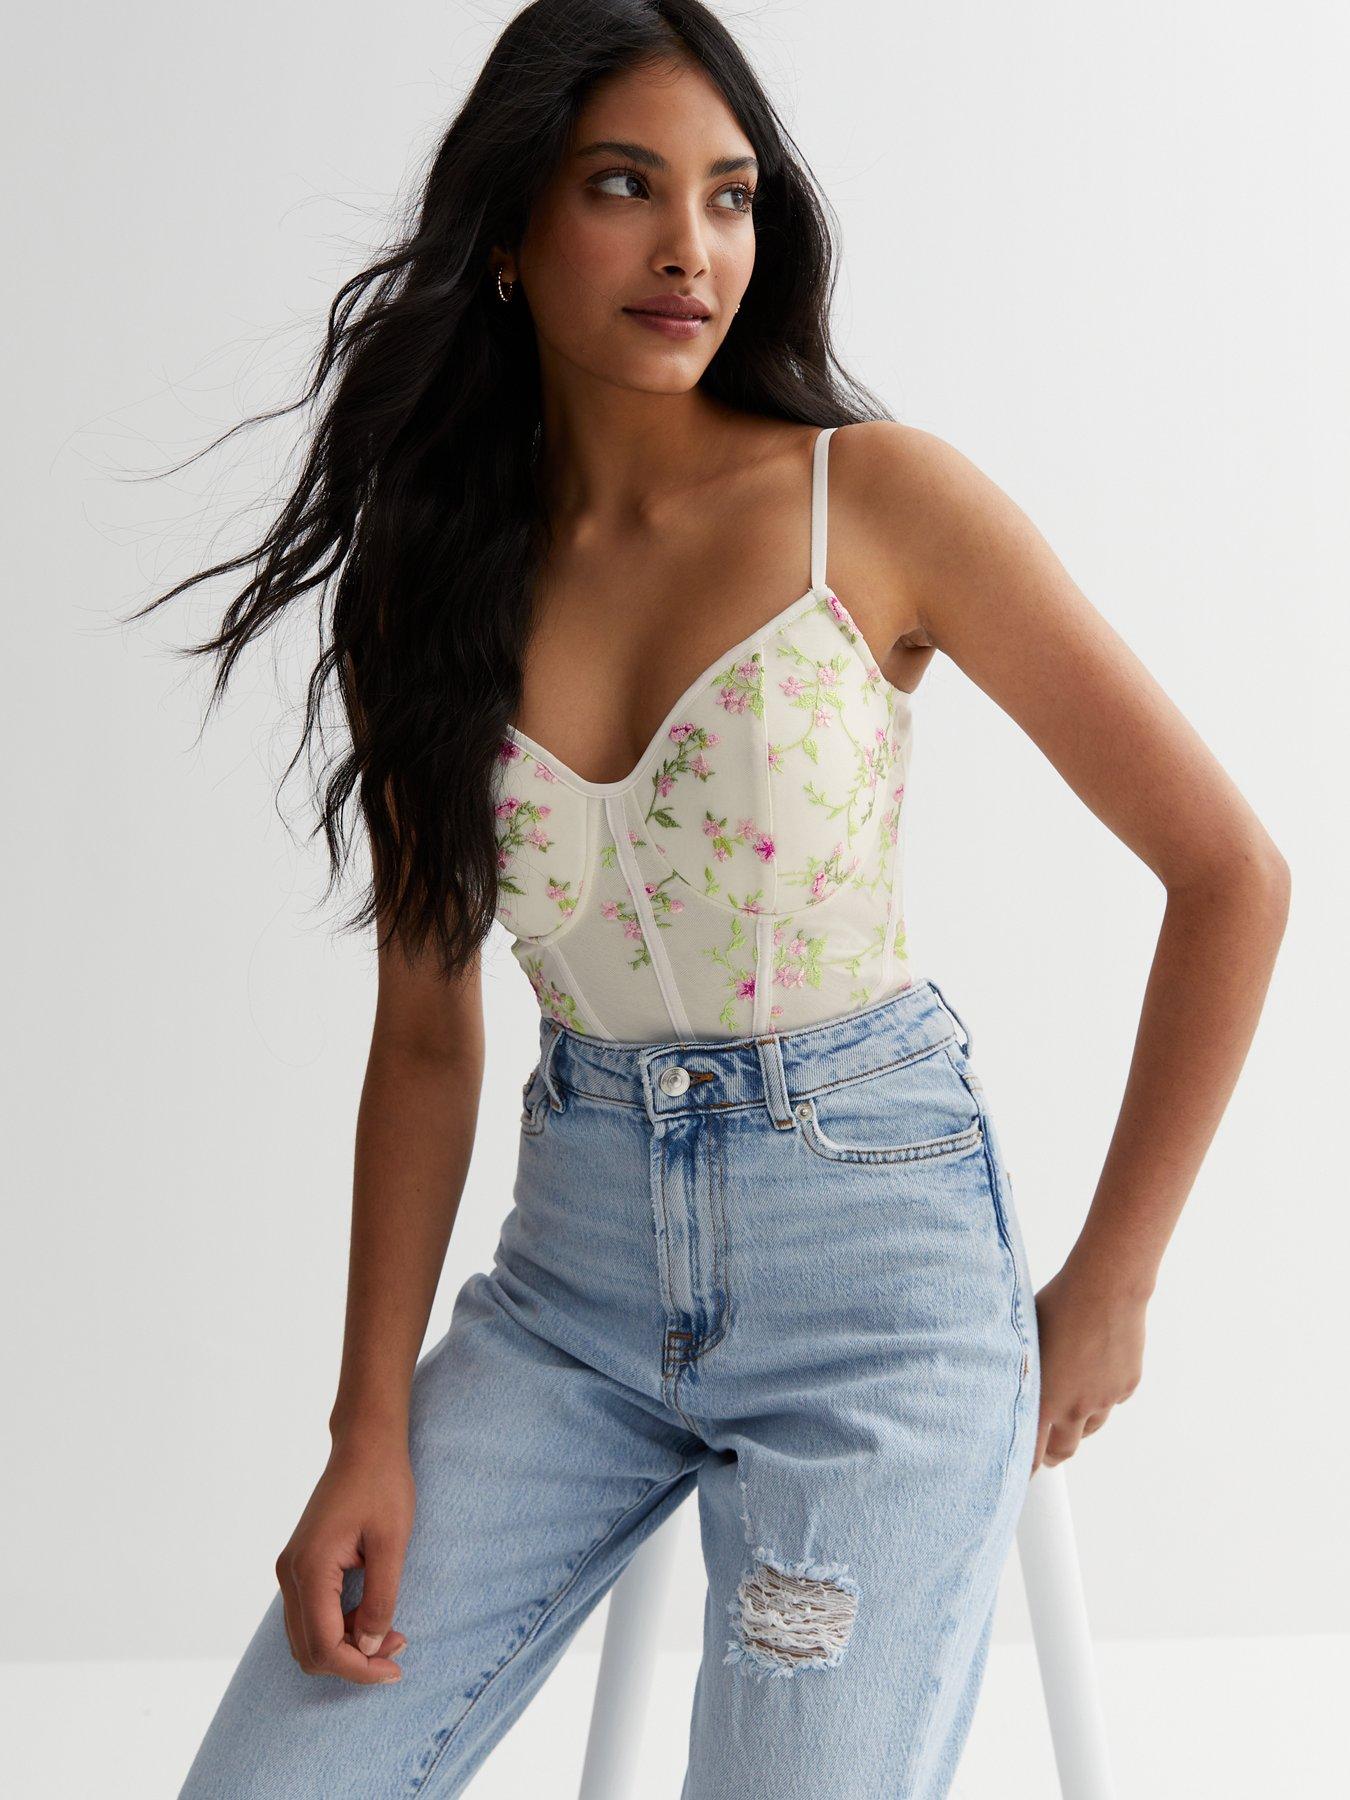 New Look Cream Floral Strappy Bustier Bodysuit